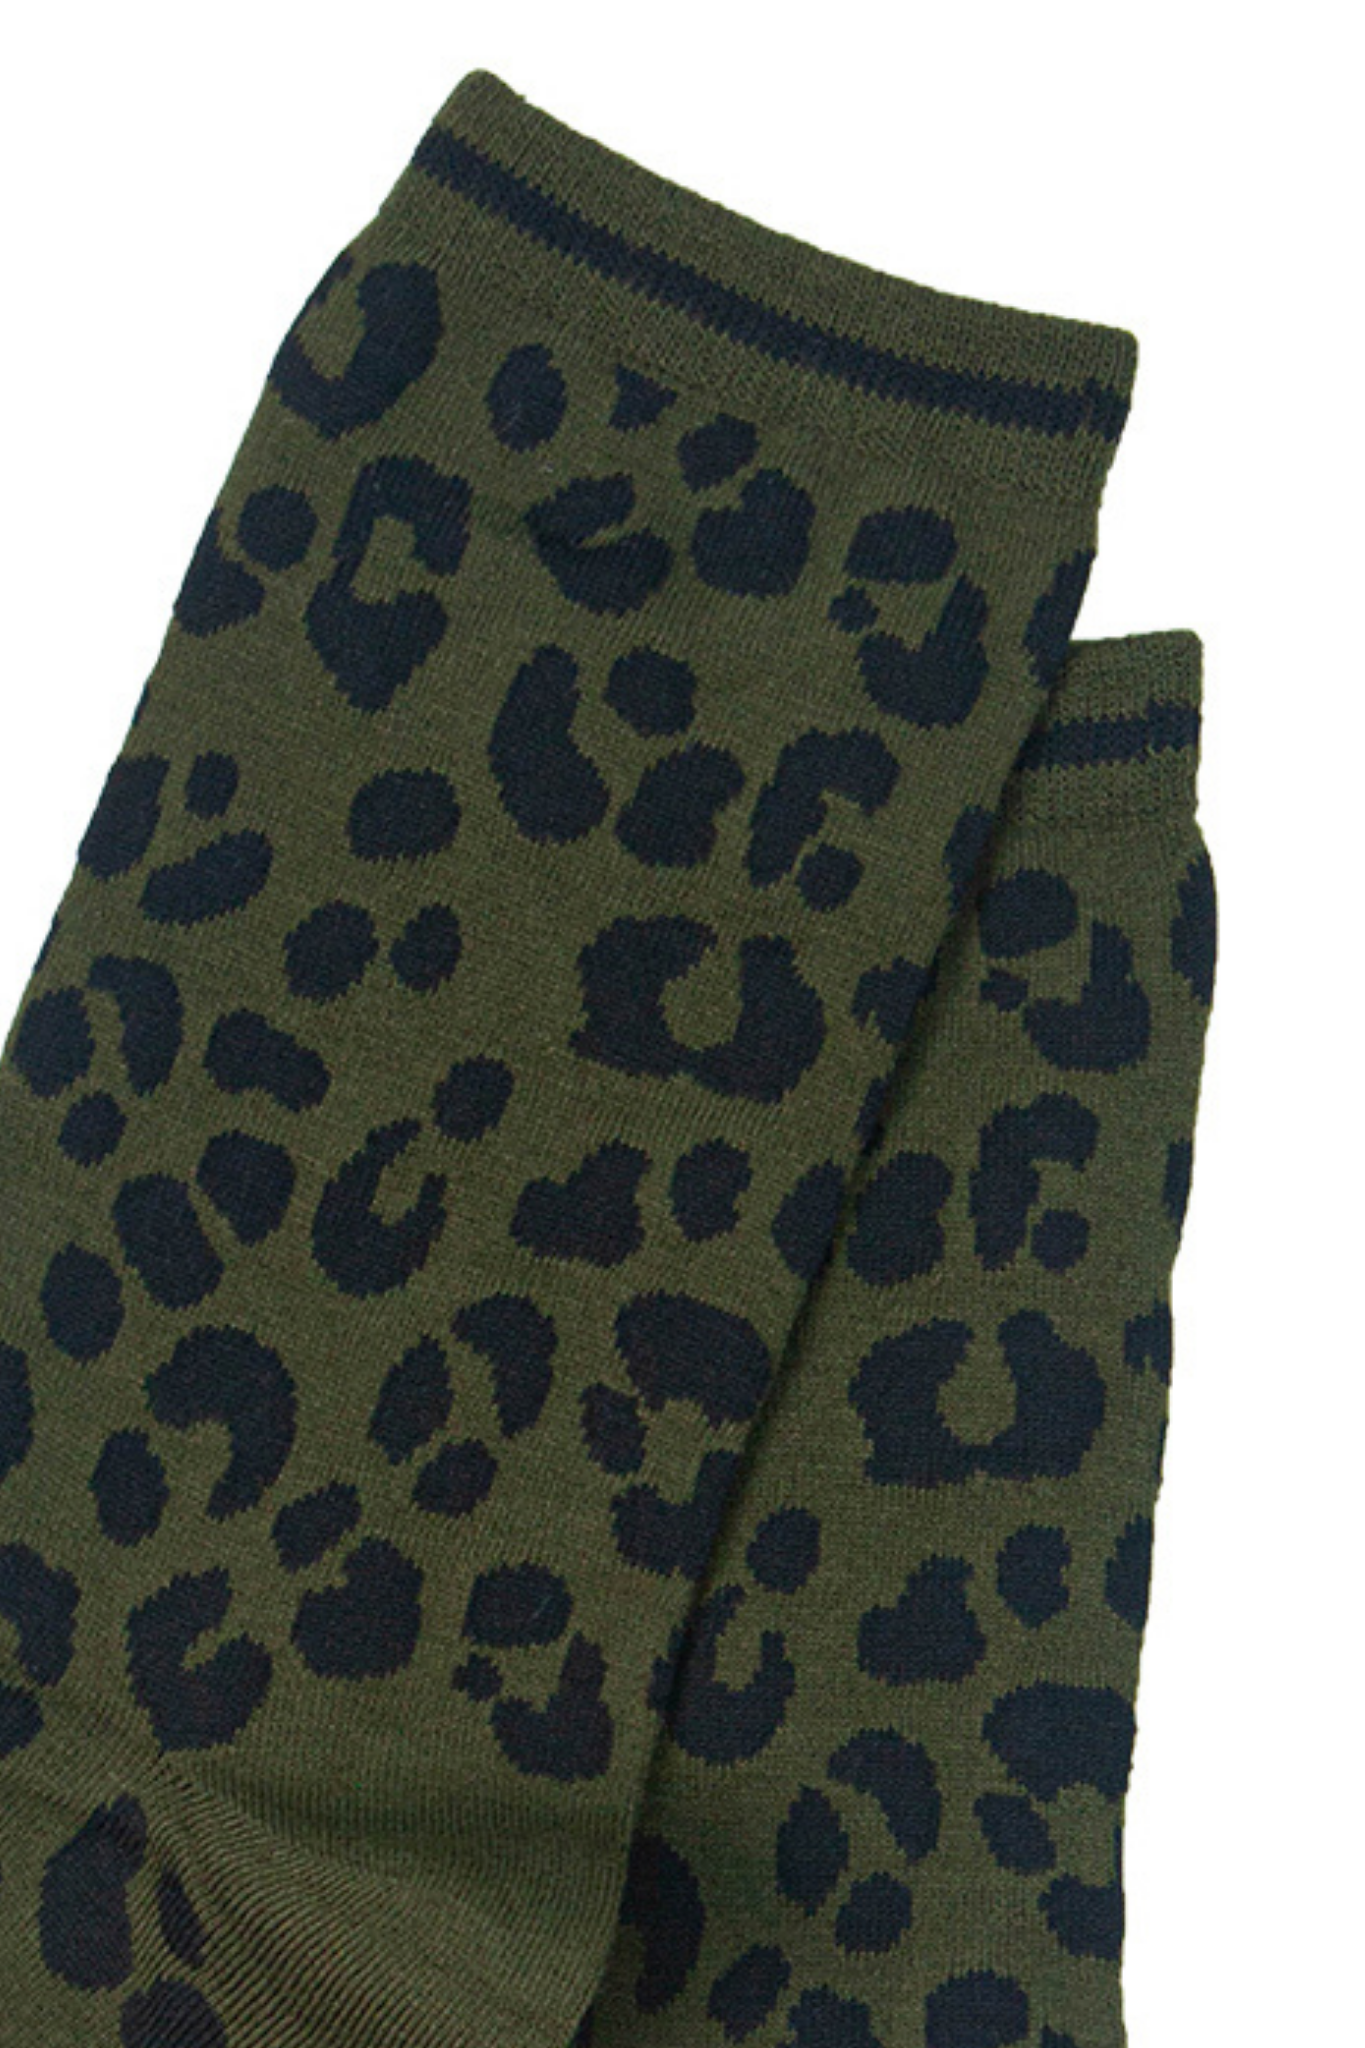 close up of the animal print pattern 